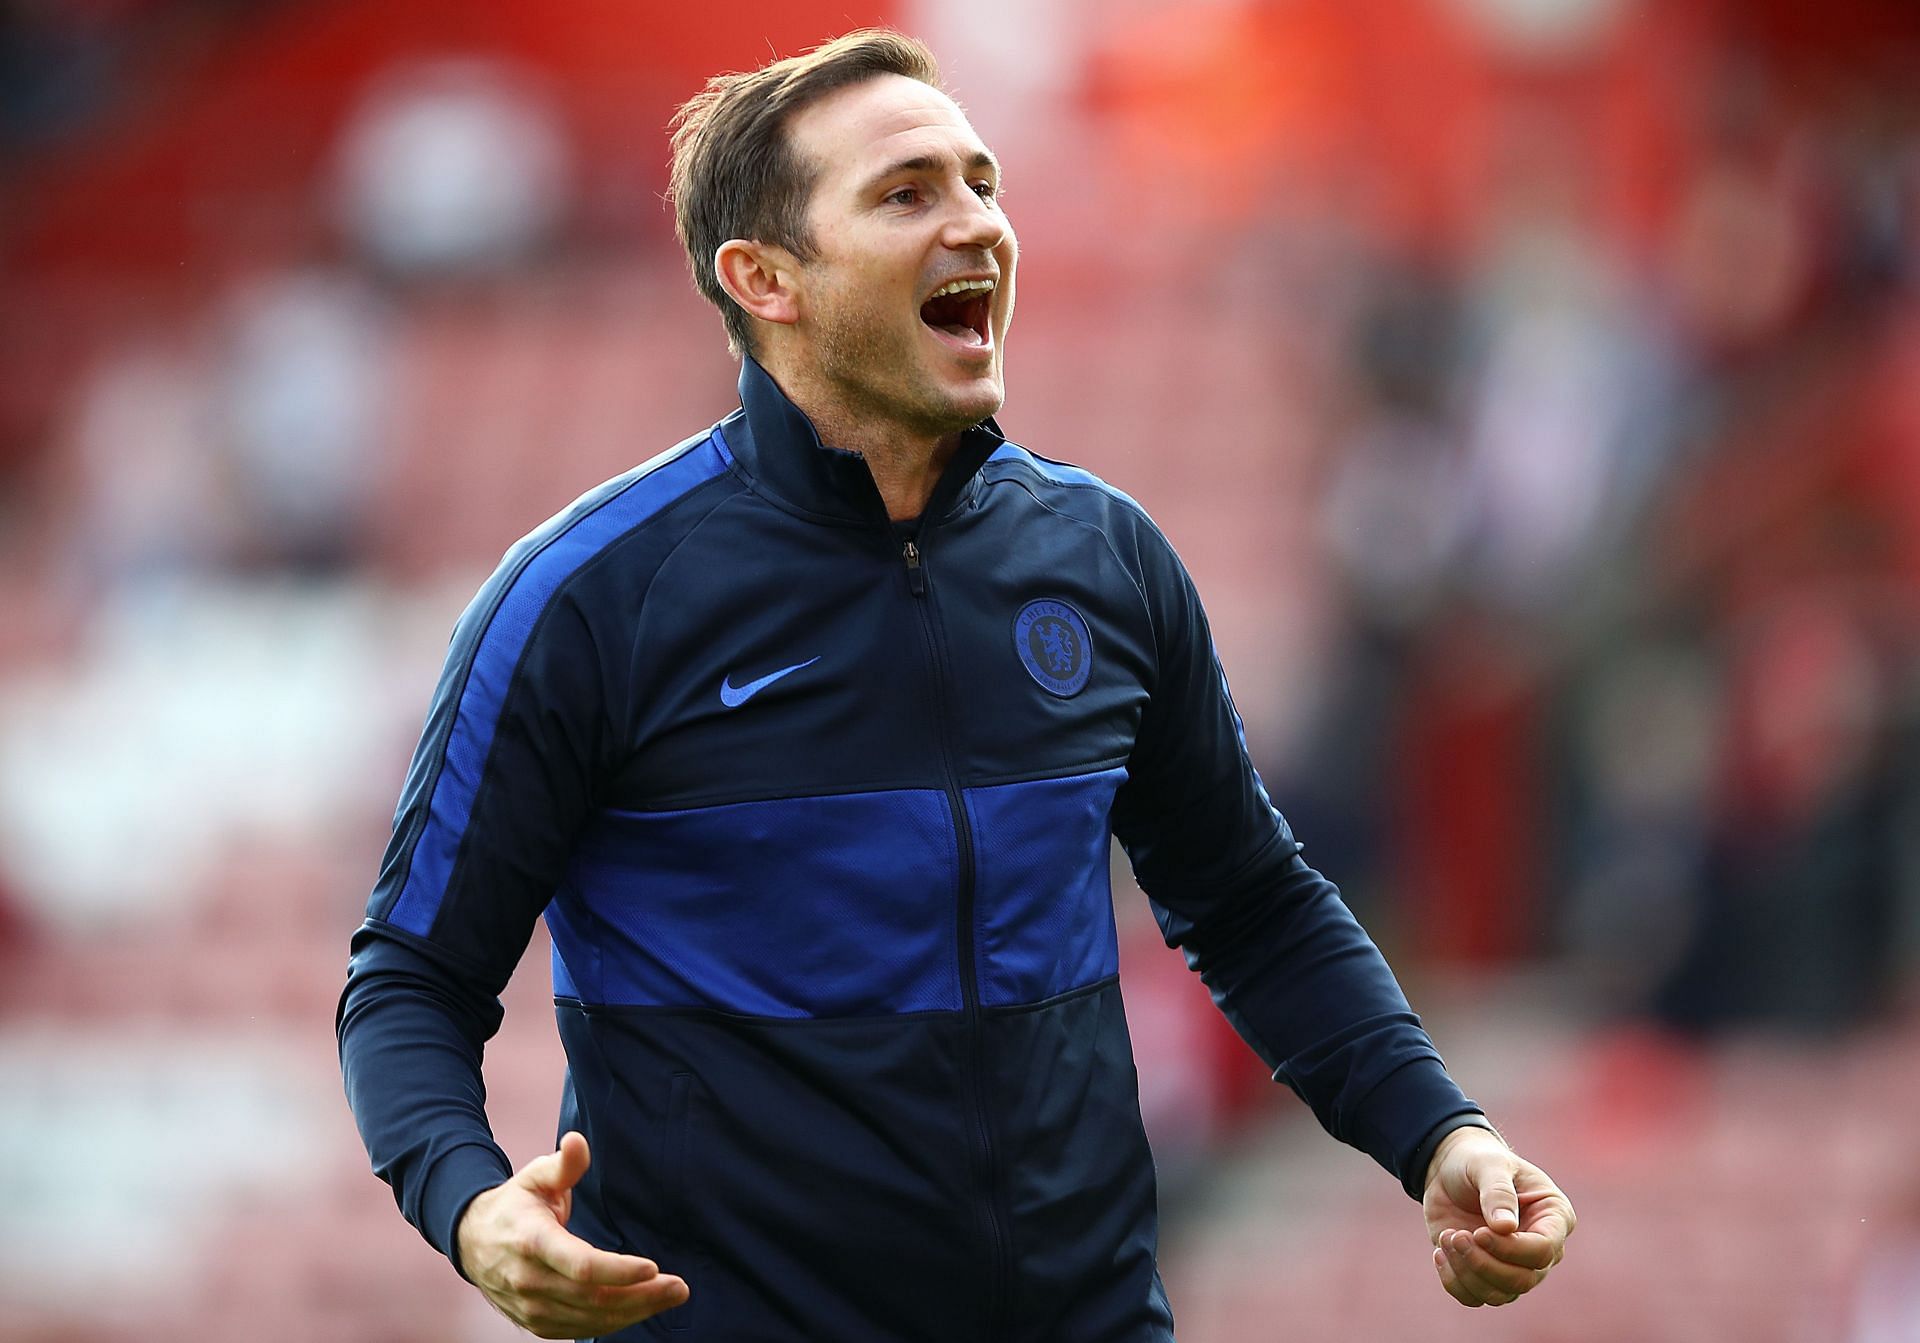 Former Chelsea player and manager Frank Lampard during a game against Southampton.